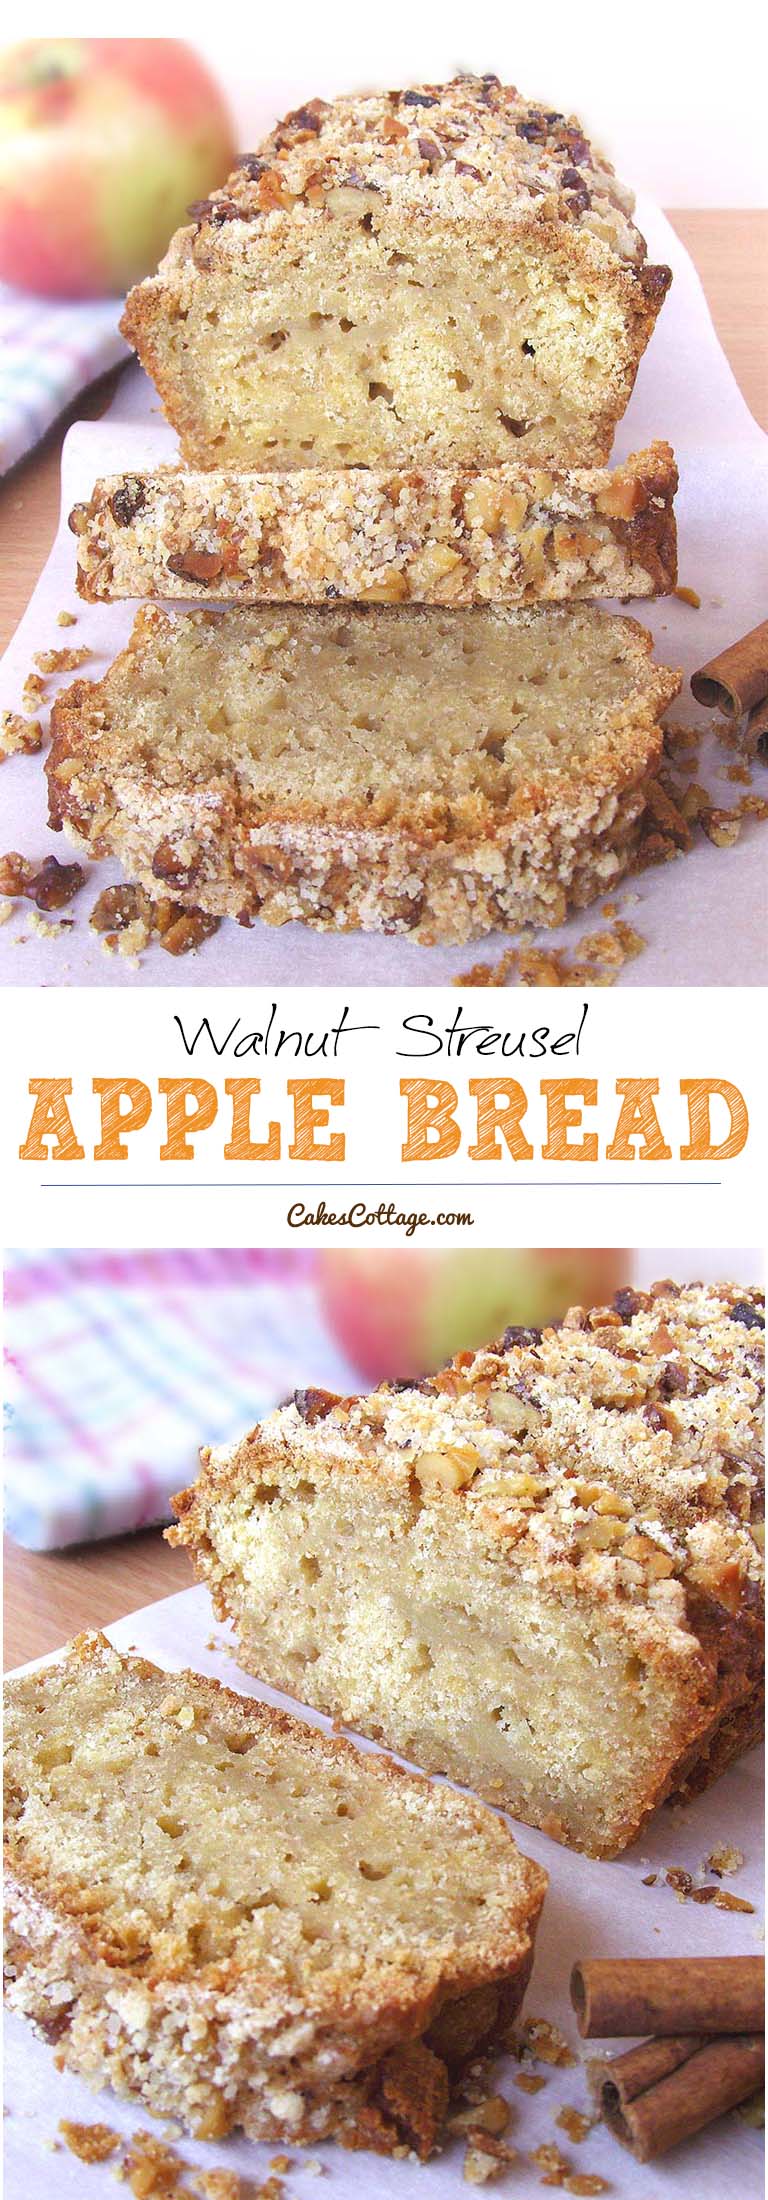 Apple Walnut Streusel Bread - An excellent way to enjoy your favorite kind of apple.